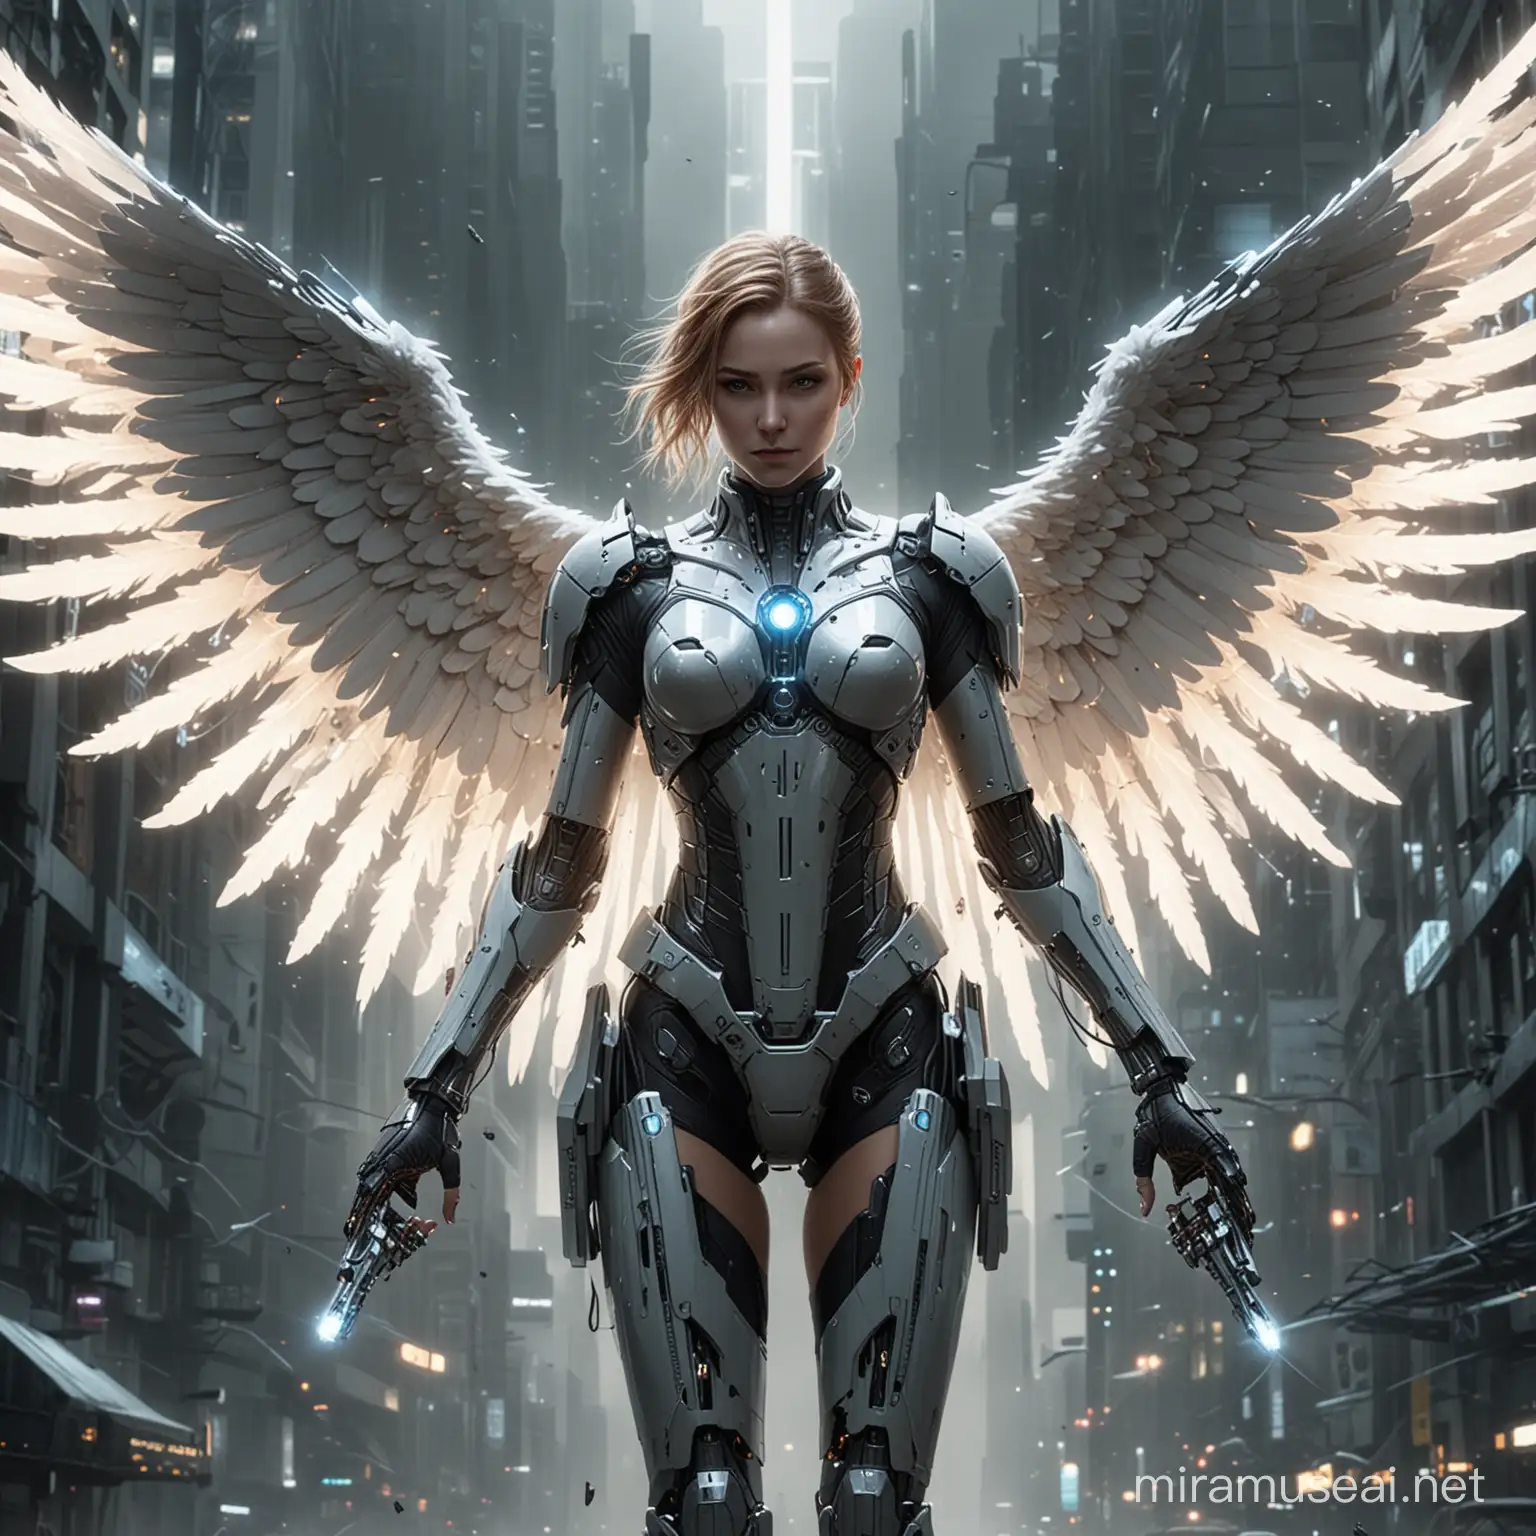 In a dystopian future, a lone angel with cybernetic enhancements fights against the oppressive forces of technology, her wings made of razor-sharp blades and her halo a glowing symbol of hope for the downtrodden masses.